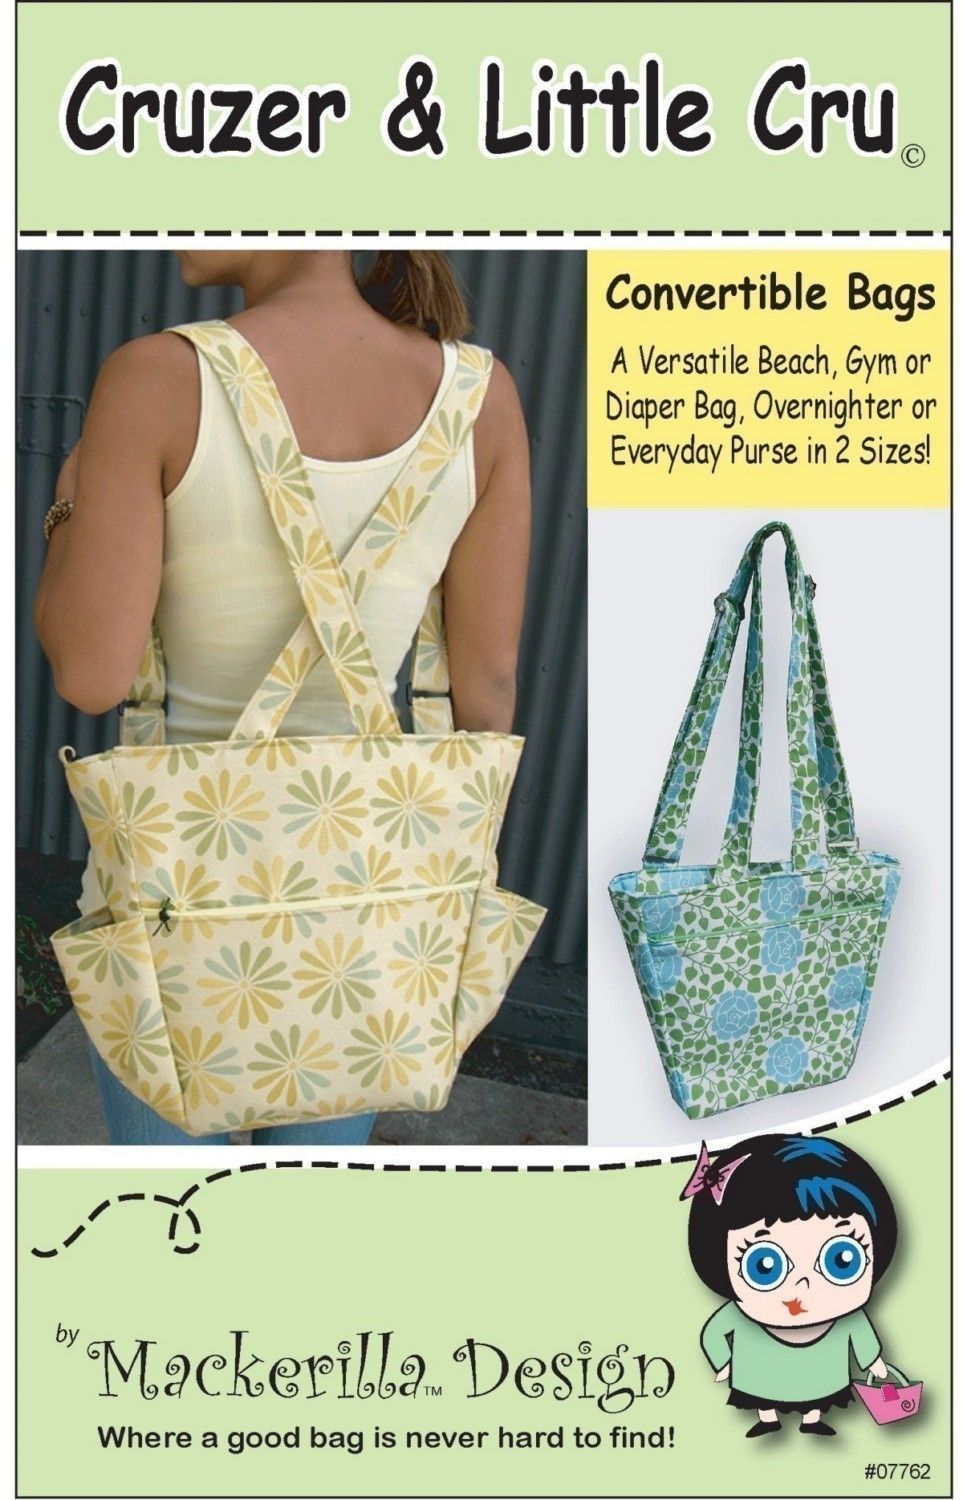 Cool backpack pattern!, pattern to buy, for inspire